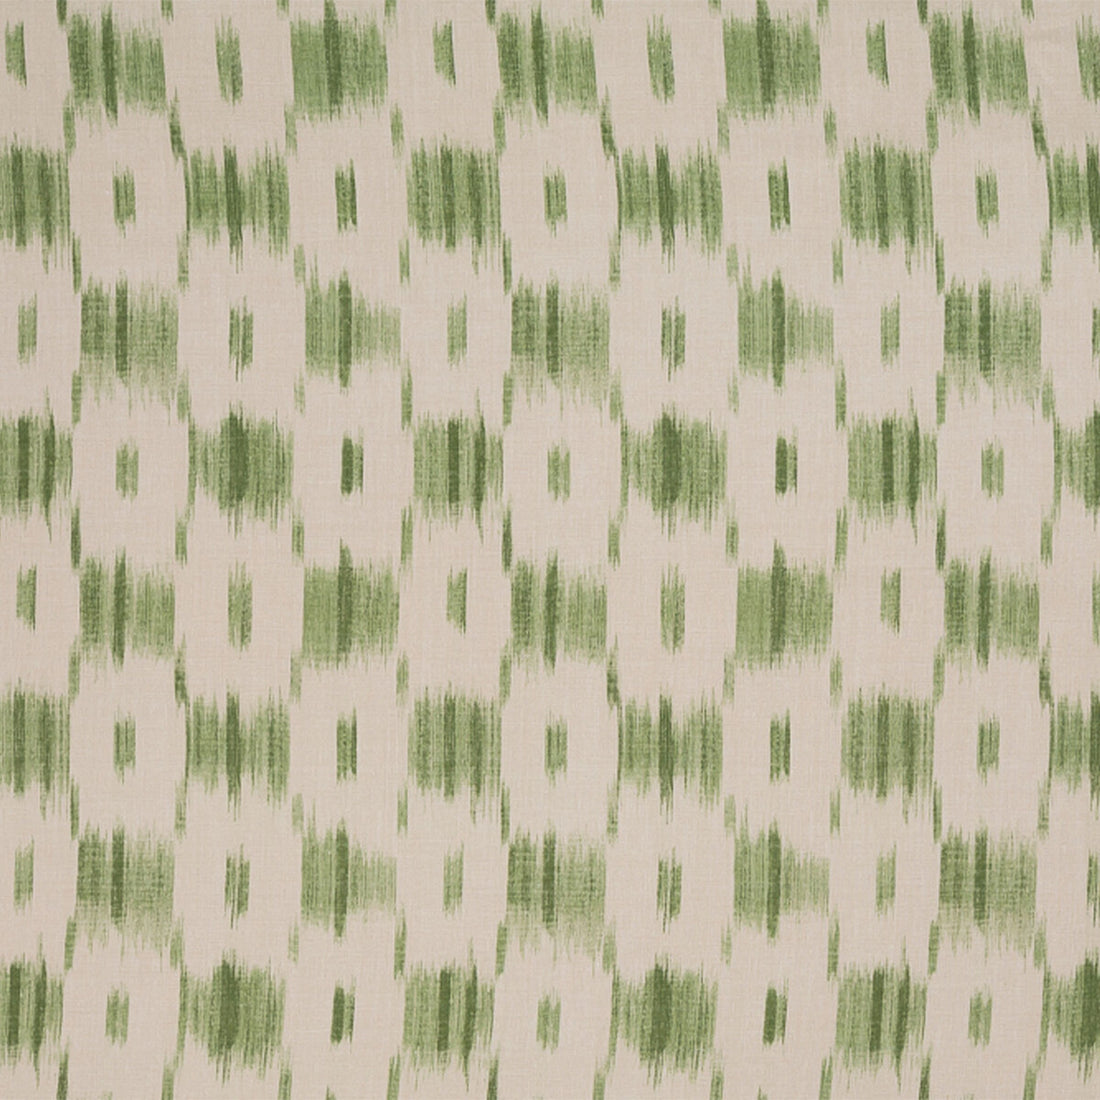 Ikat Check fabric in green color - pattern BFC-3702.3.0 - by Lee Jofa in the Blithfield collection